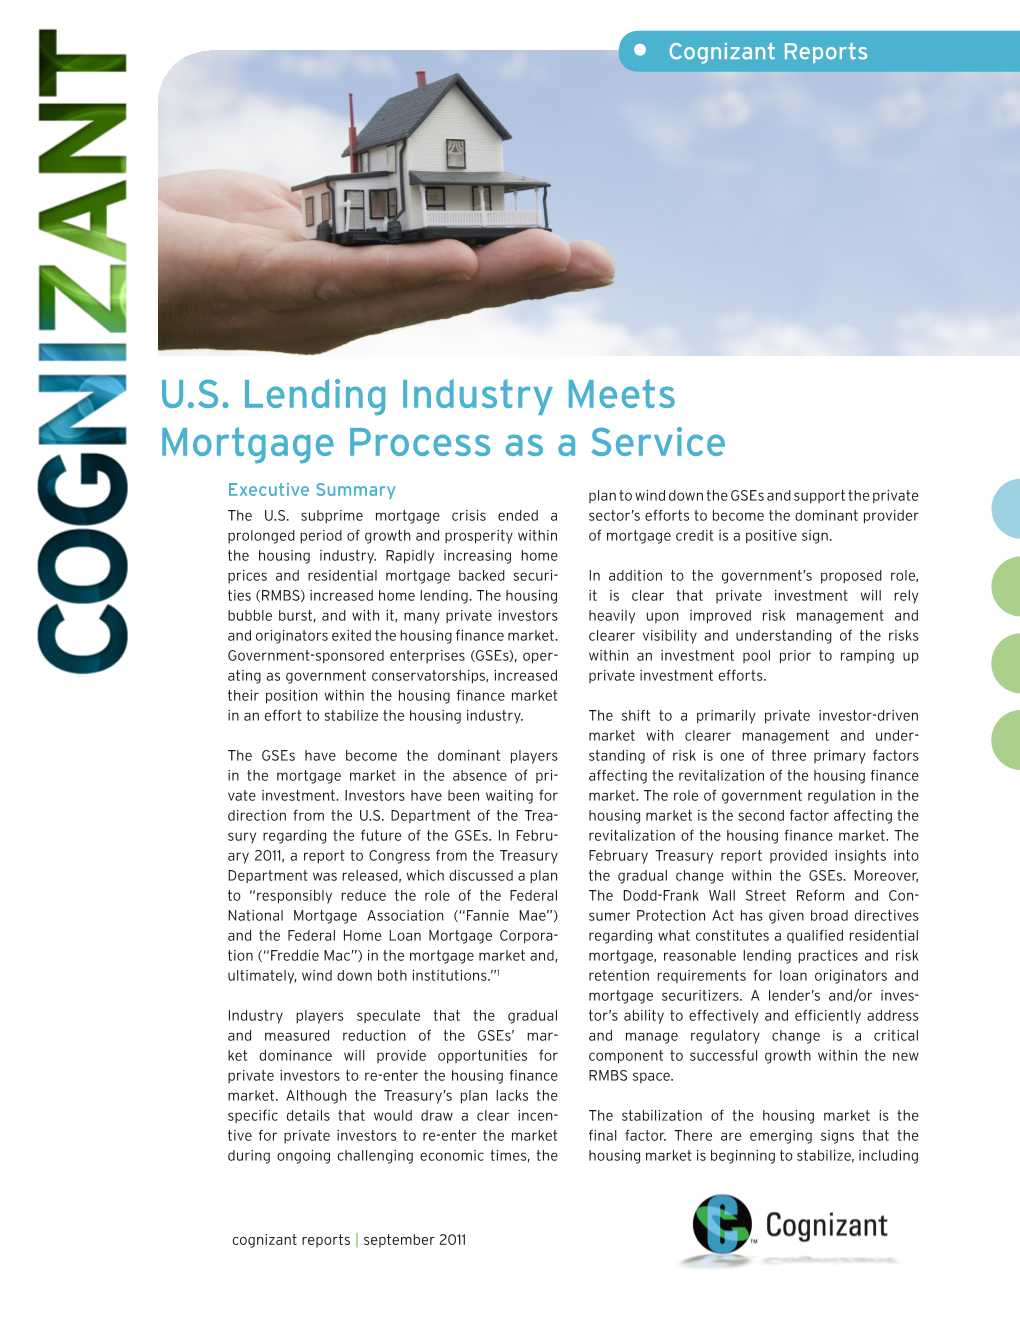 U.S. Lending Industry Meets Mortgage Process As a Service